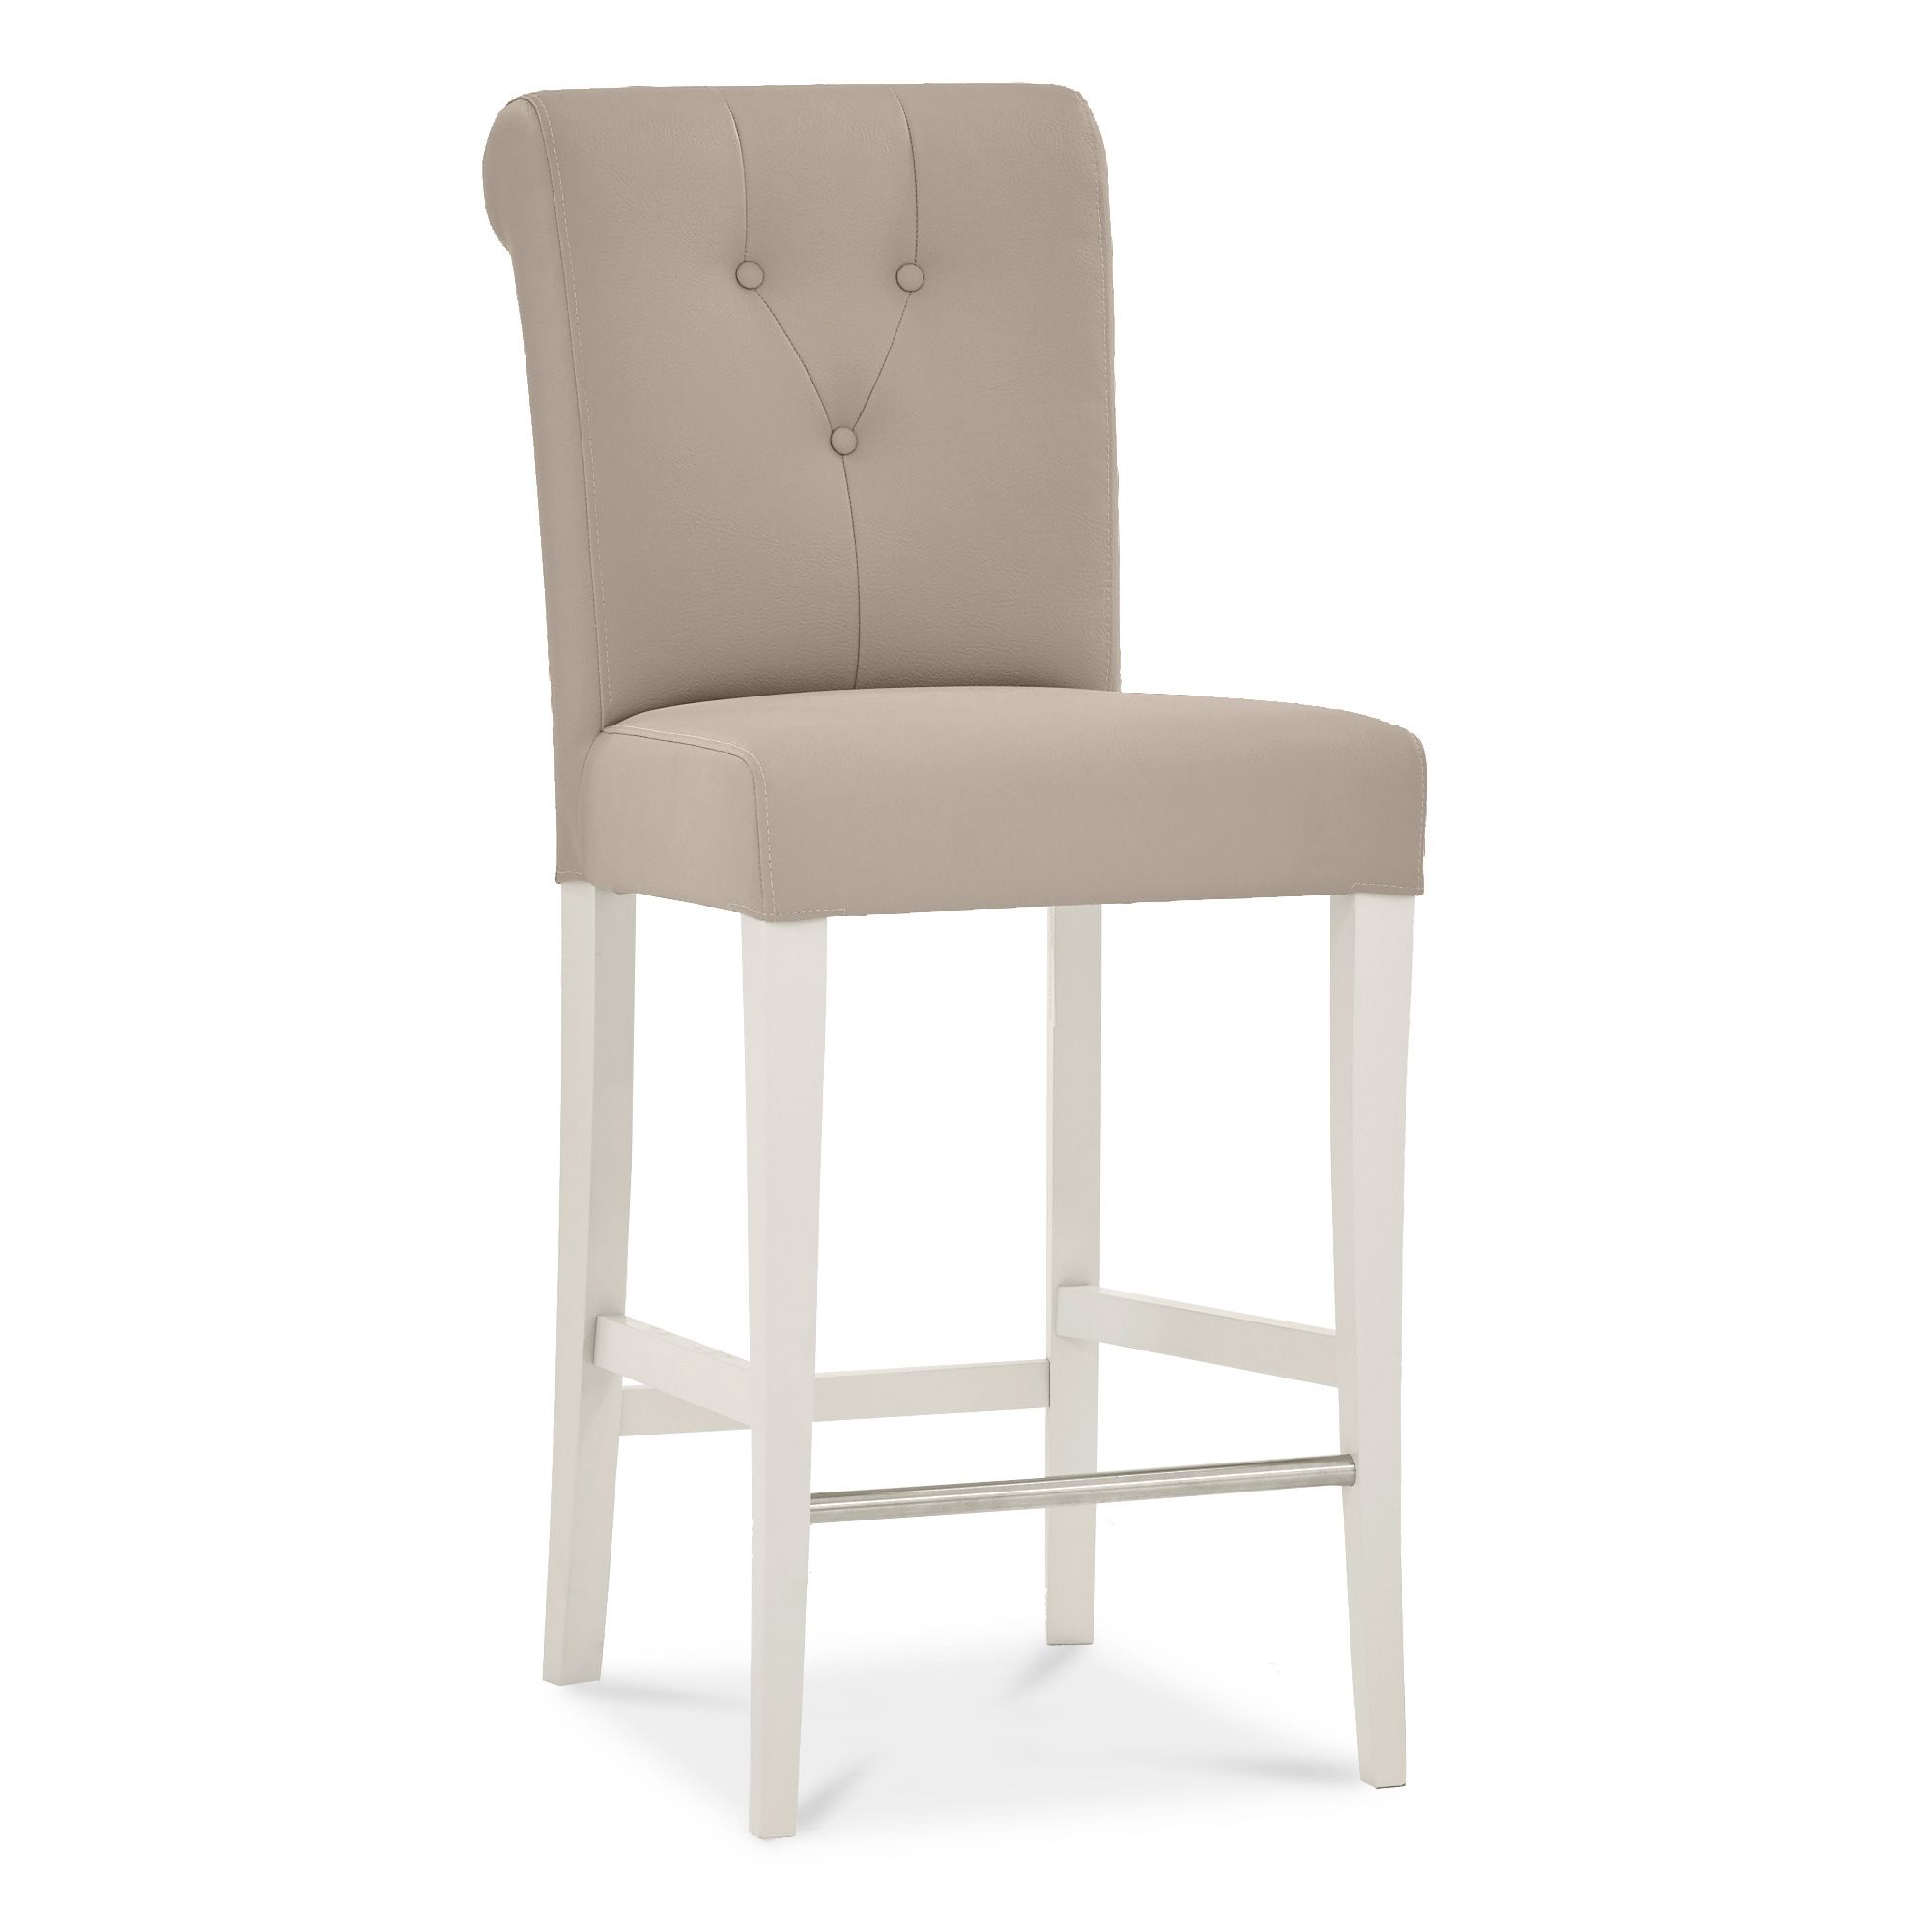 Freeport Low Bar Stool Faux Leather, Grey Leather Look Bar Stools